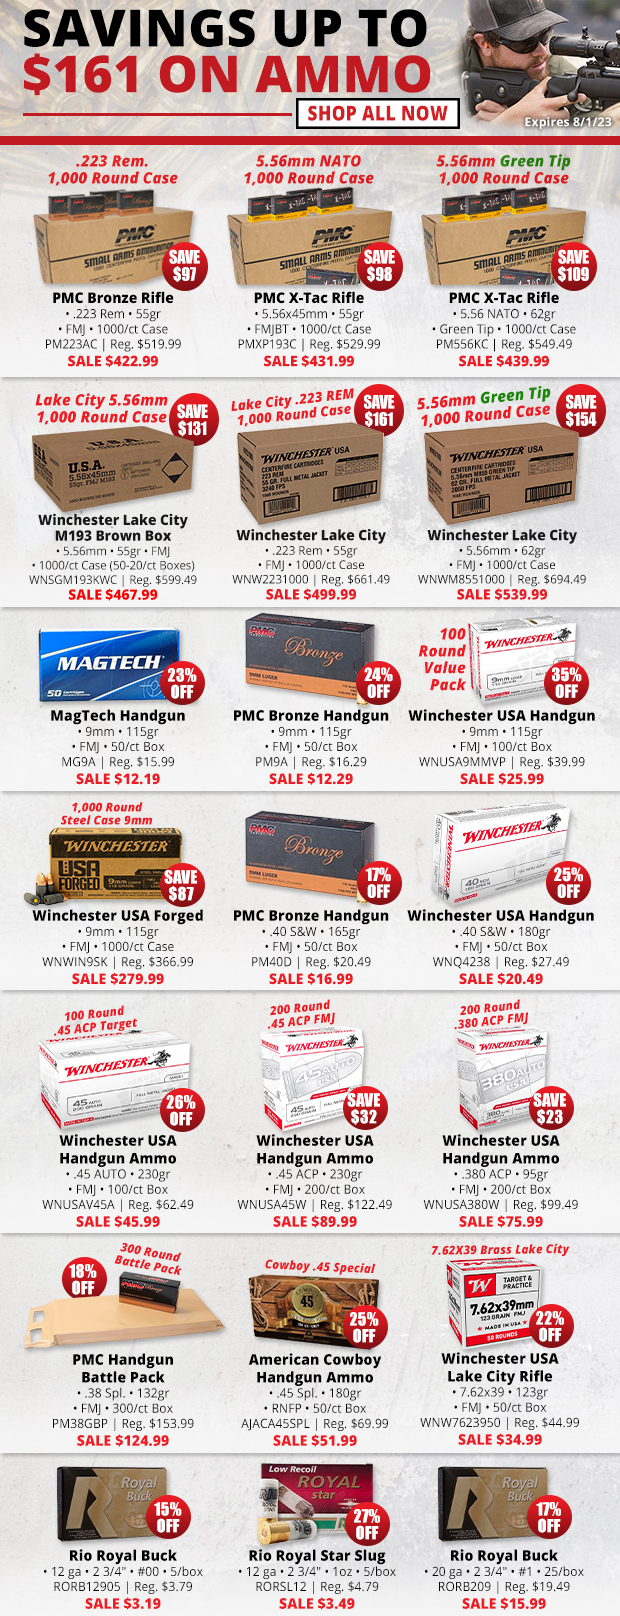 Over $150+ Off with Ammo Deals!